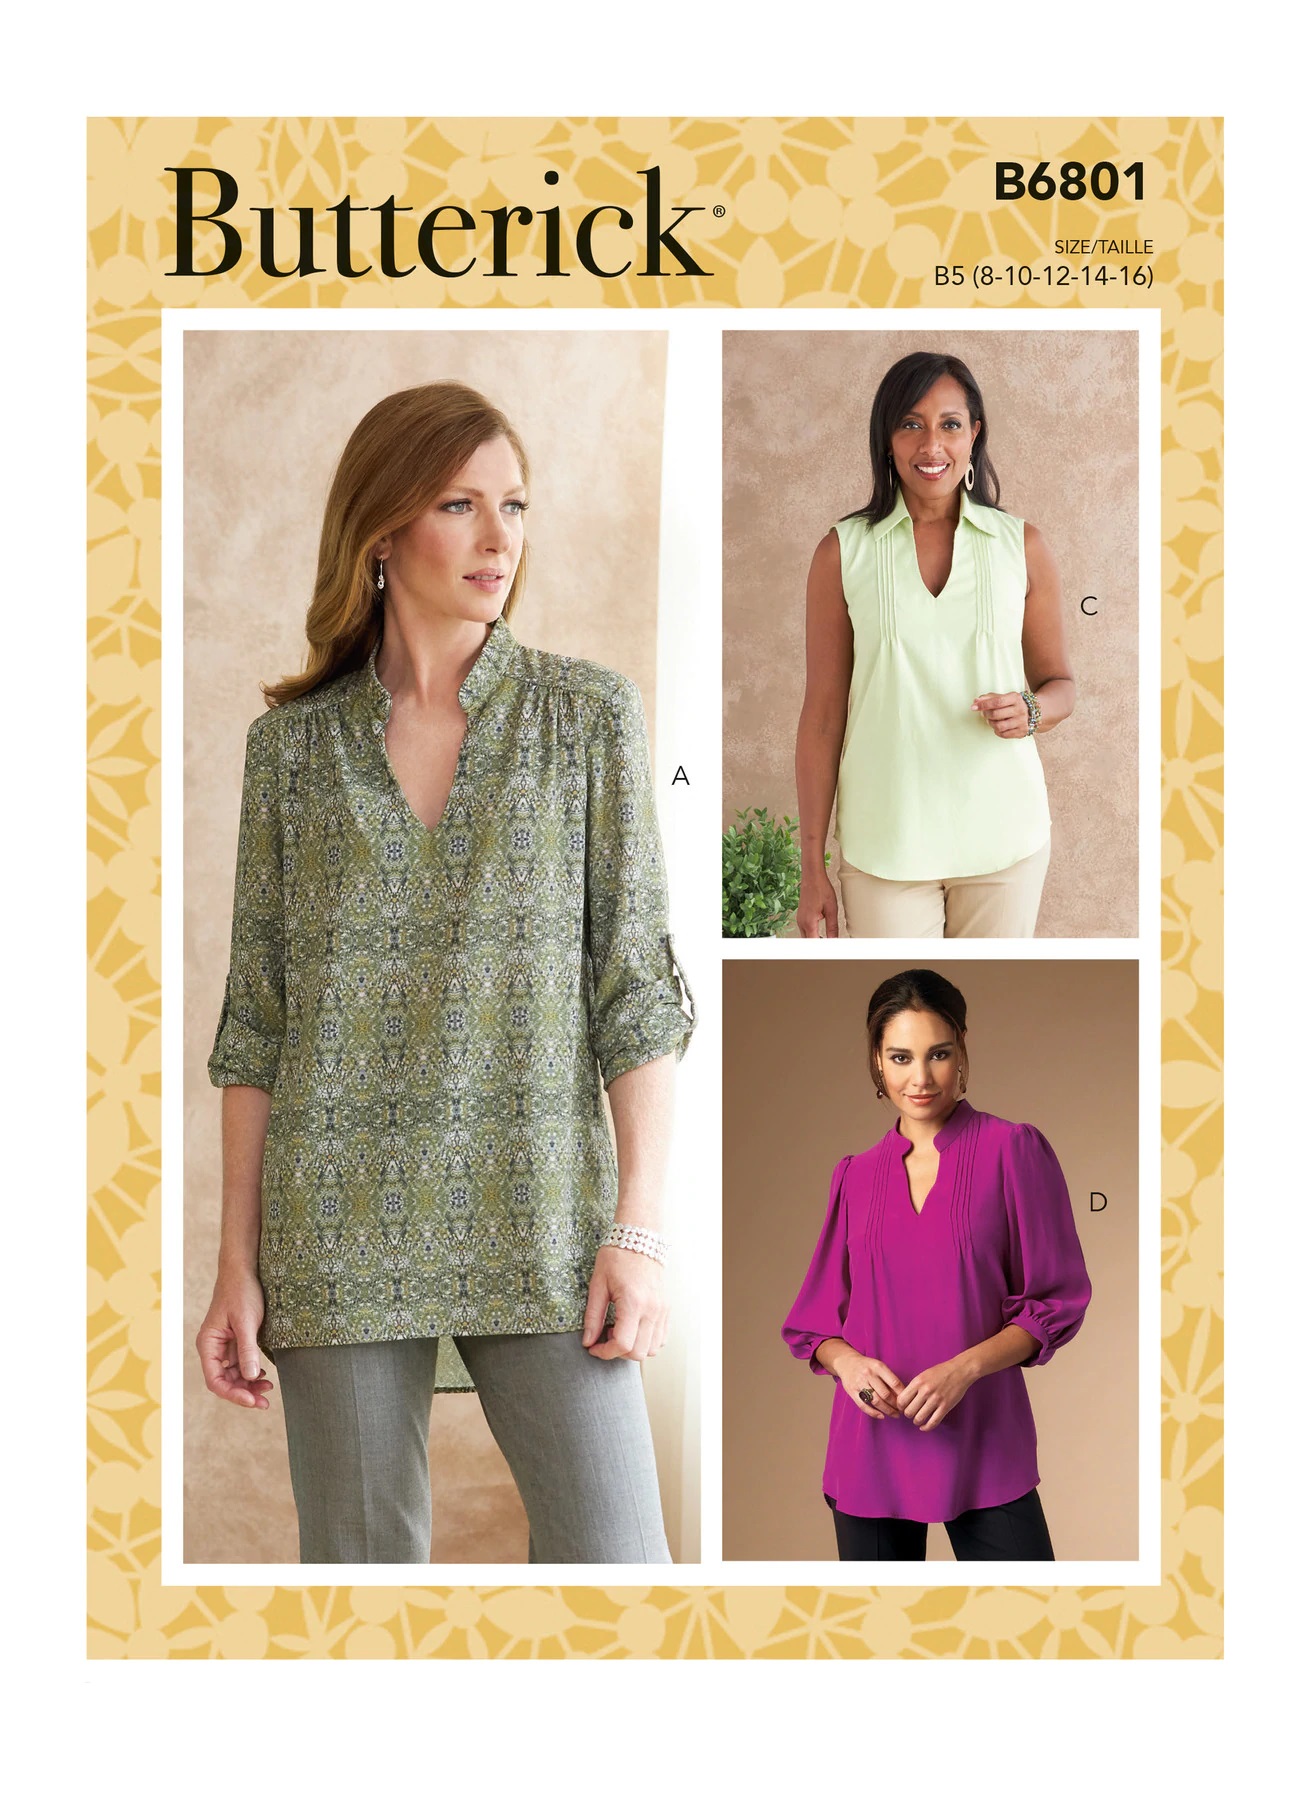 Butterick 6801 Misses' & Women's Tucked Or Gathered Top